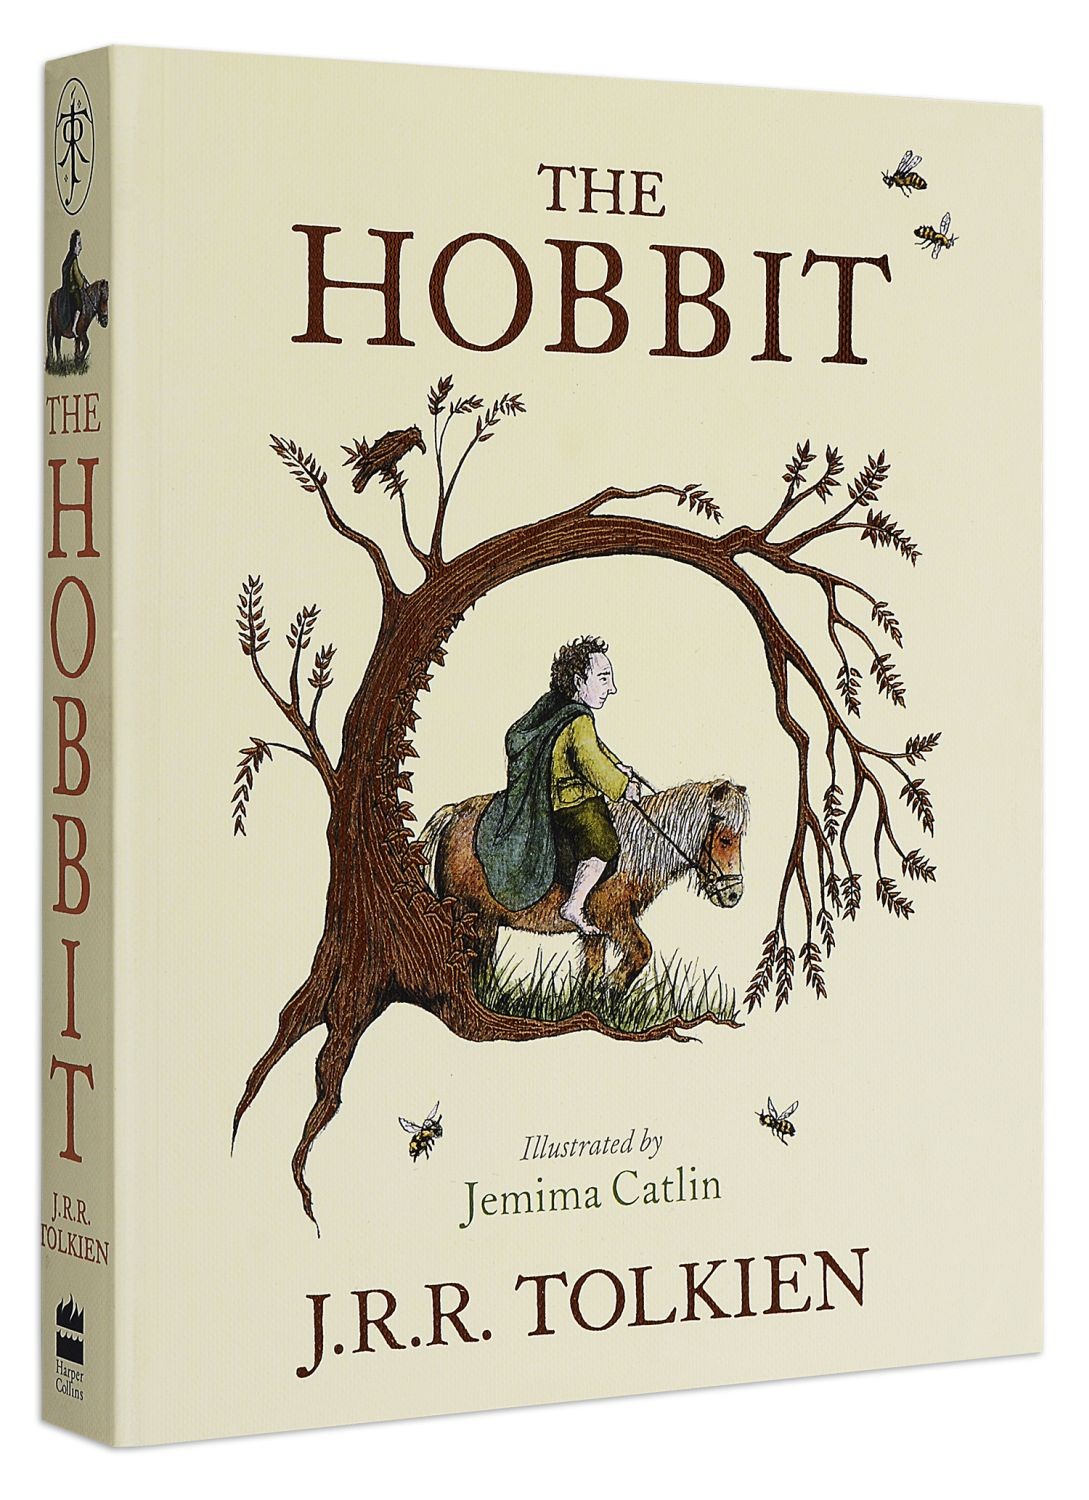 ballet Give Conceited The Hobbit: Colour Illustrated Edition | Ozone.ro